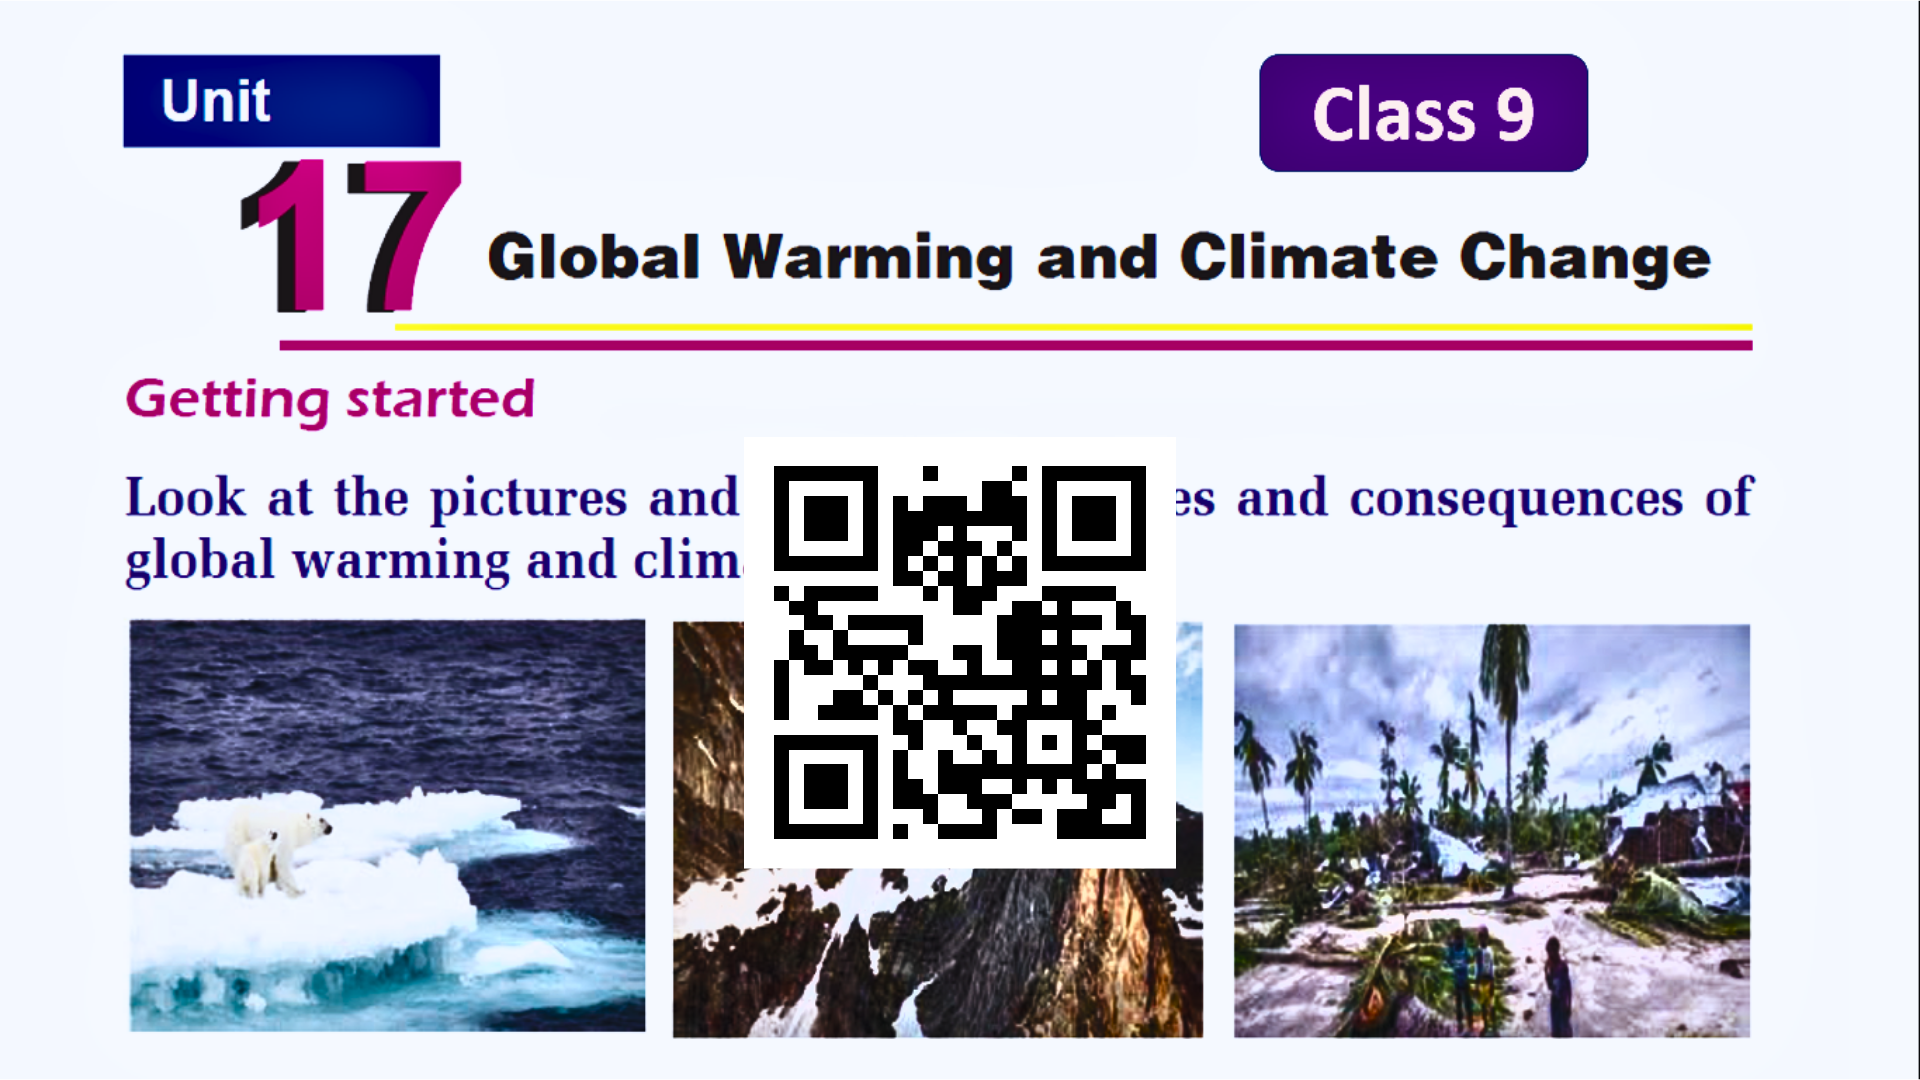 Unit-17 Global Warming and Climate Change [Class - 9]